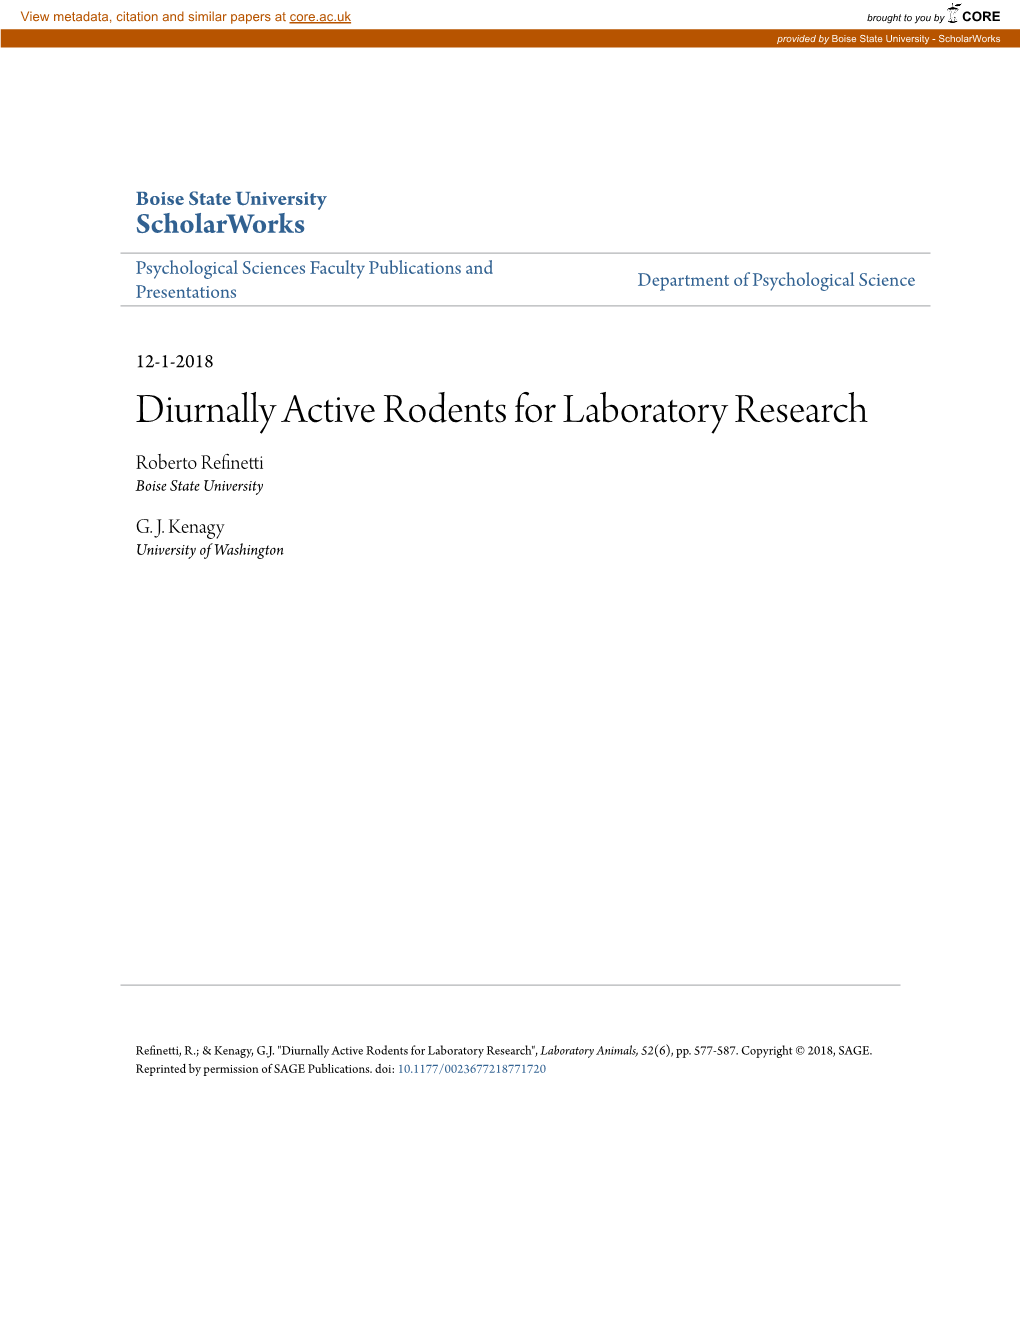 Diurnally Active Rodents for Laboratory Research Roberto Refinetti Boise State University